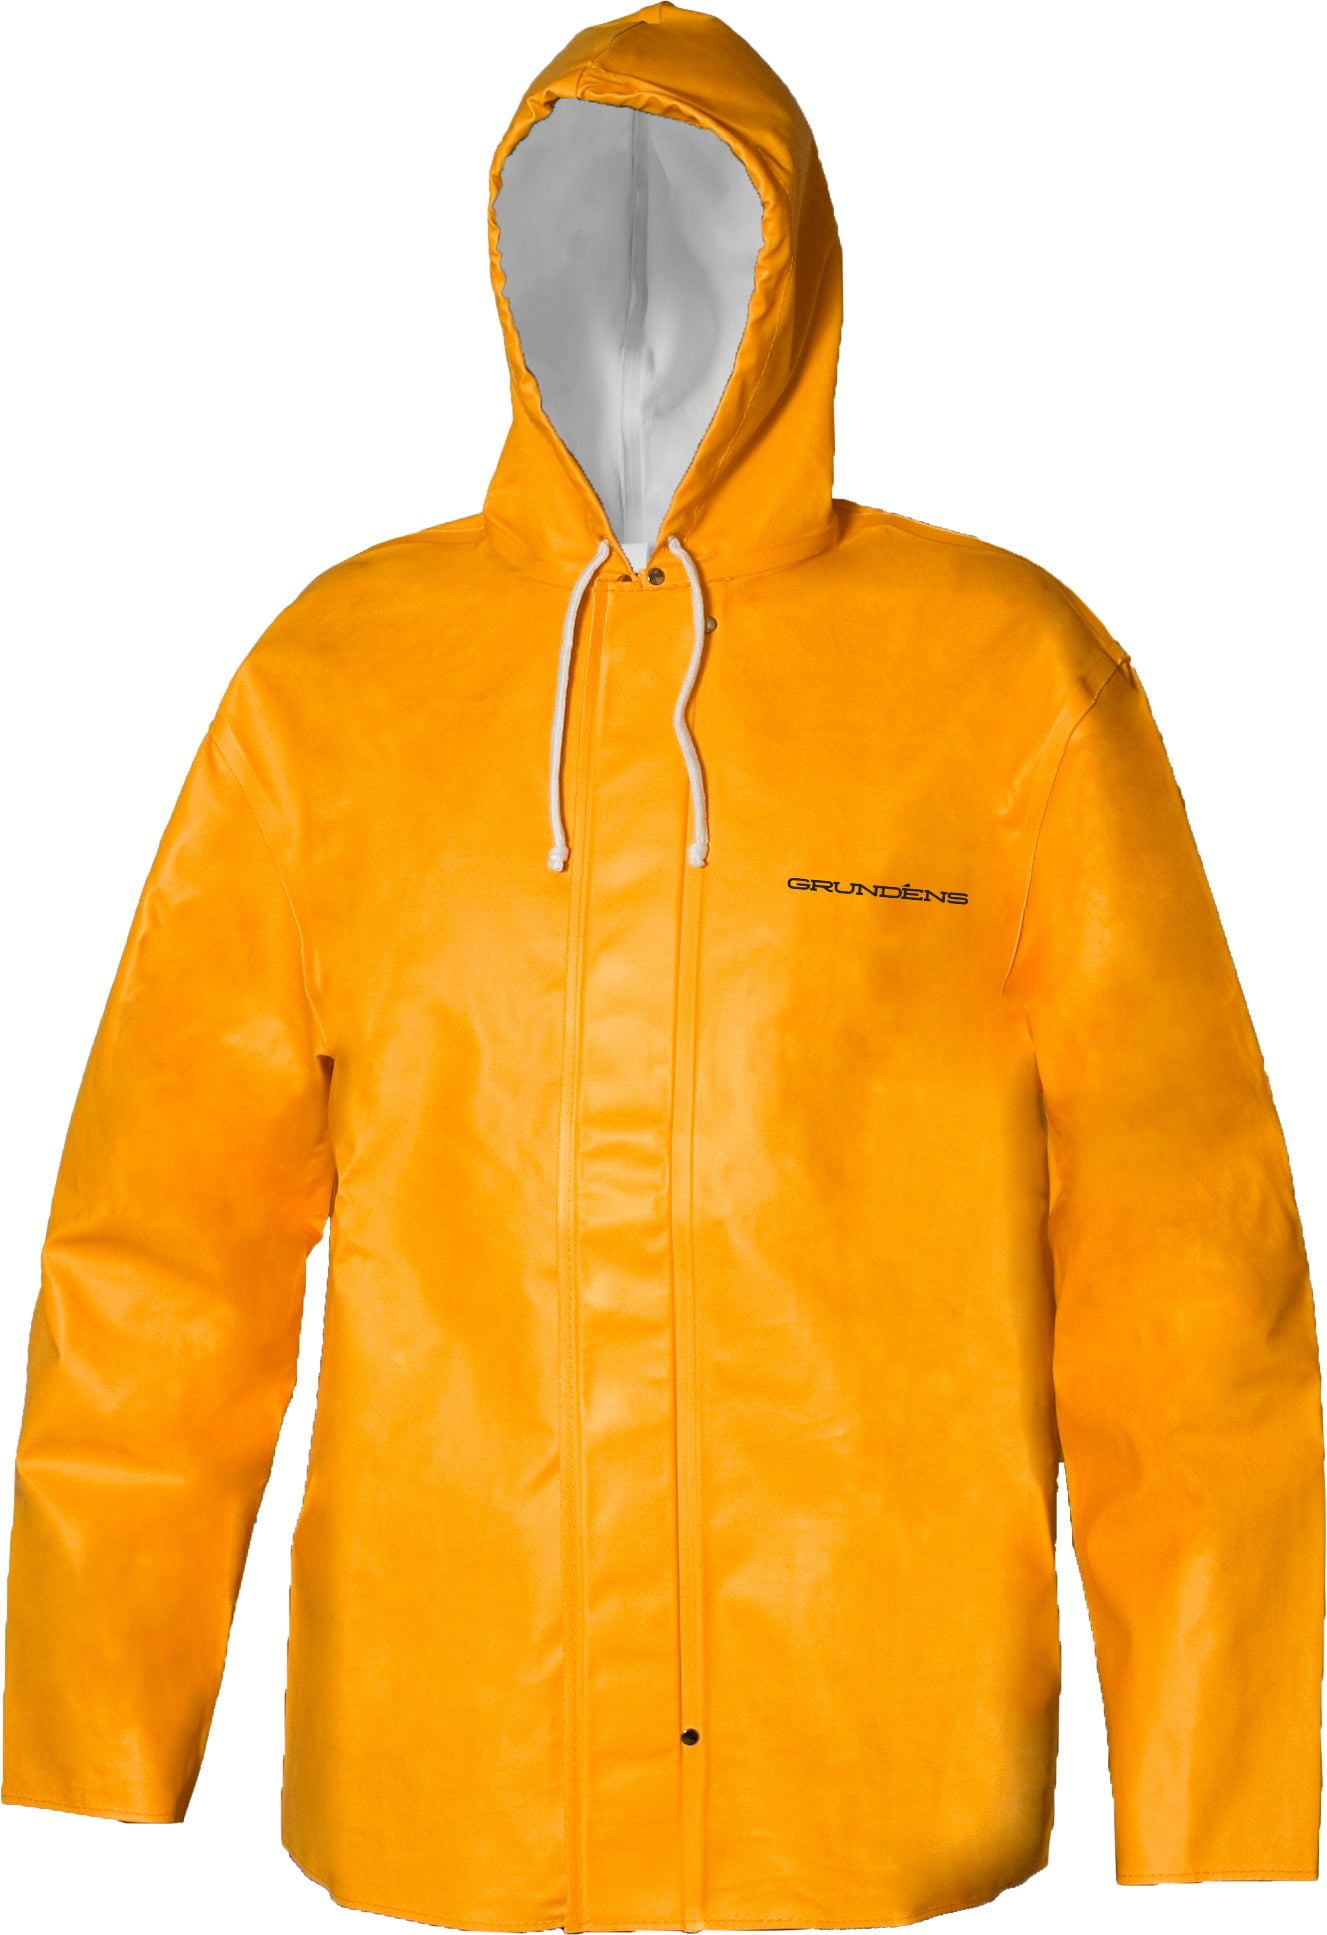 GRUNDENS Clipper 82 Hooded Commercial Fishing Jacket